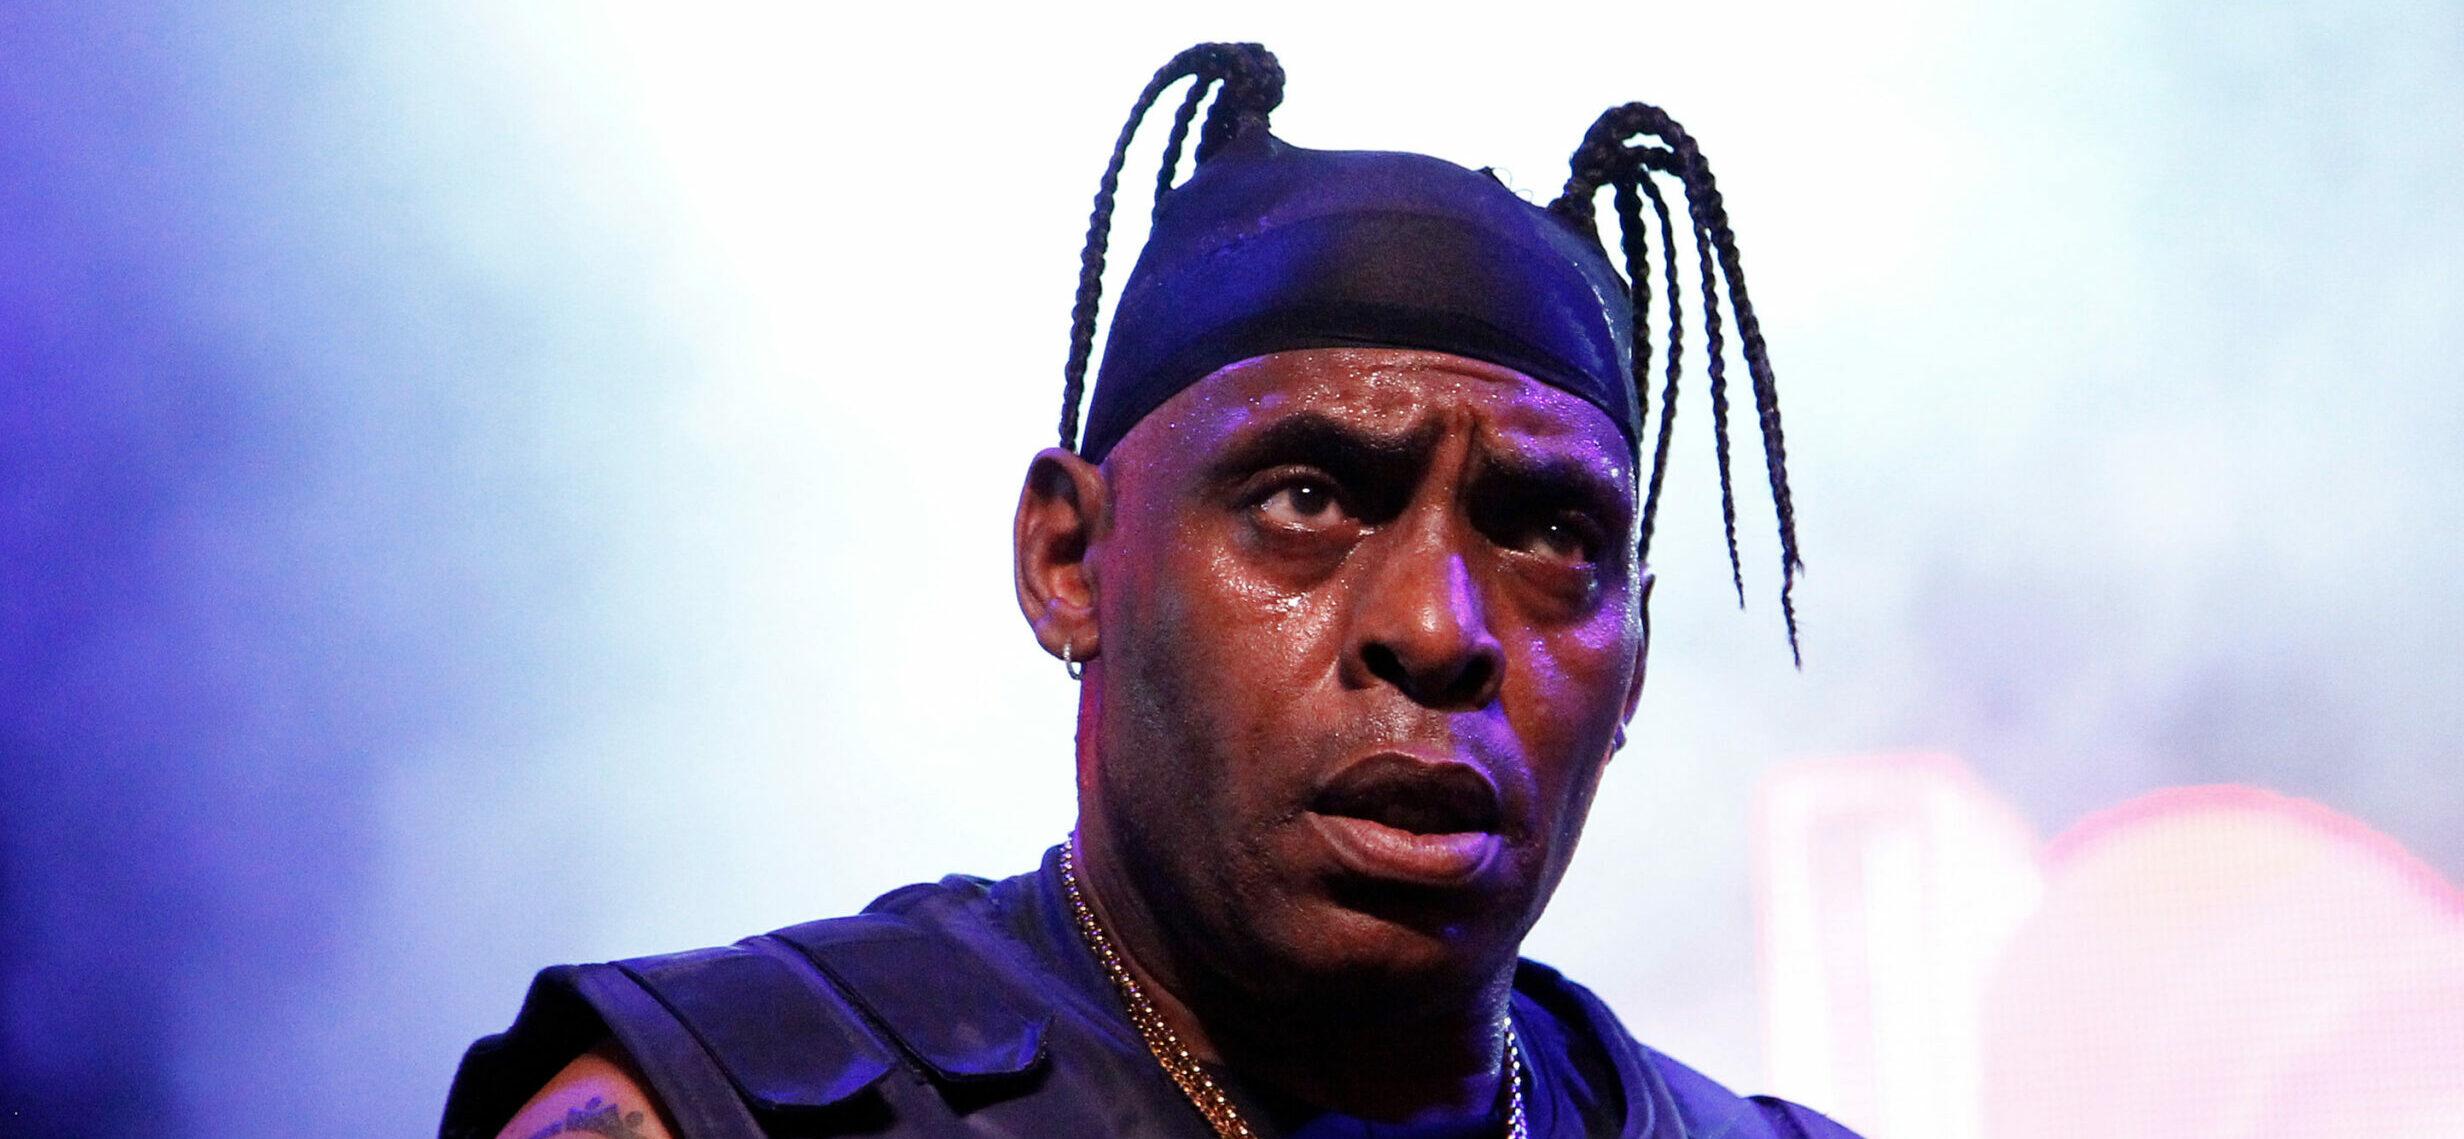 ‘Gangsta’s Paradise’ Rapper Coolio Suddenly Dies at 59